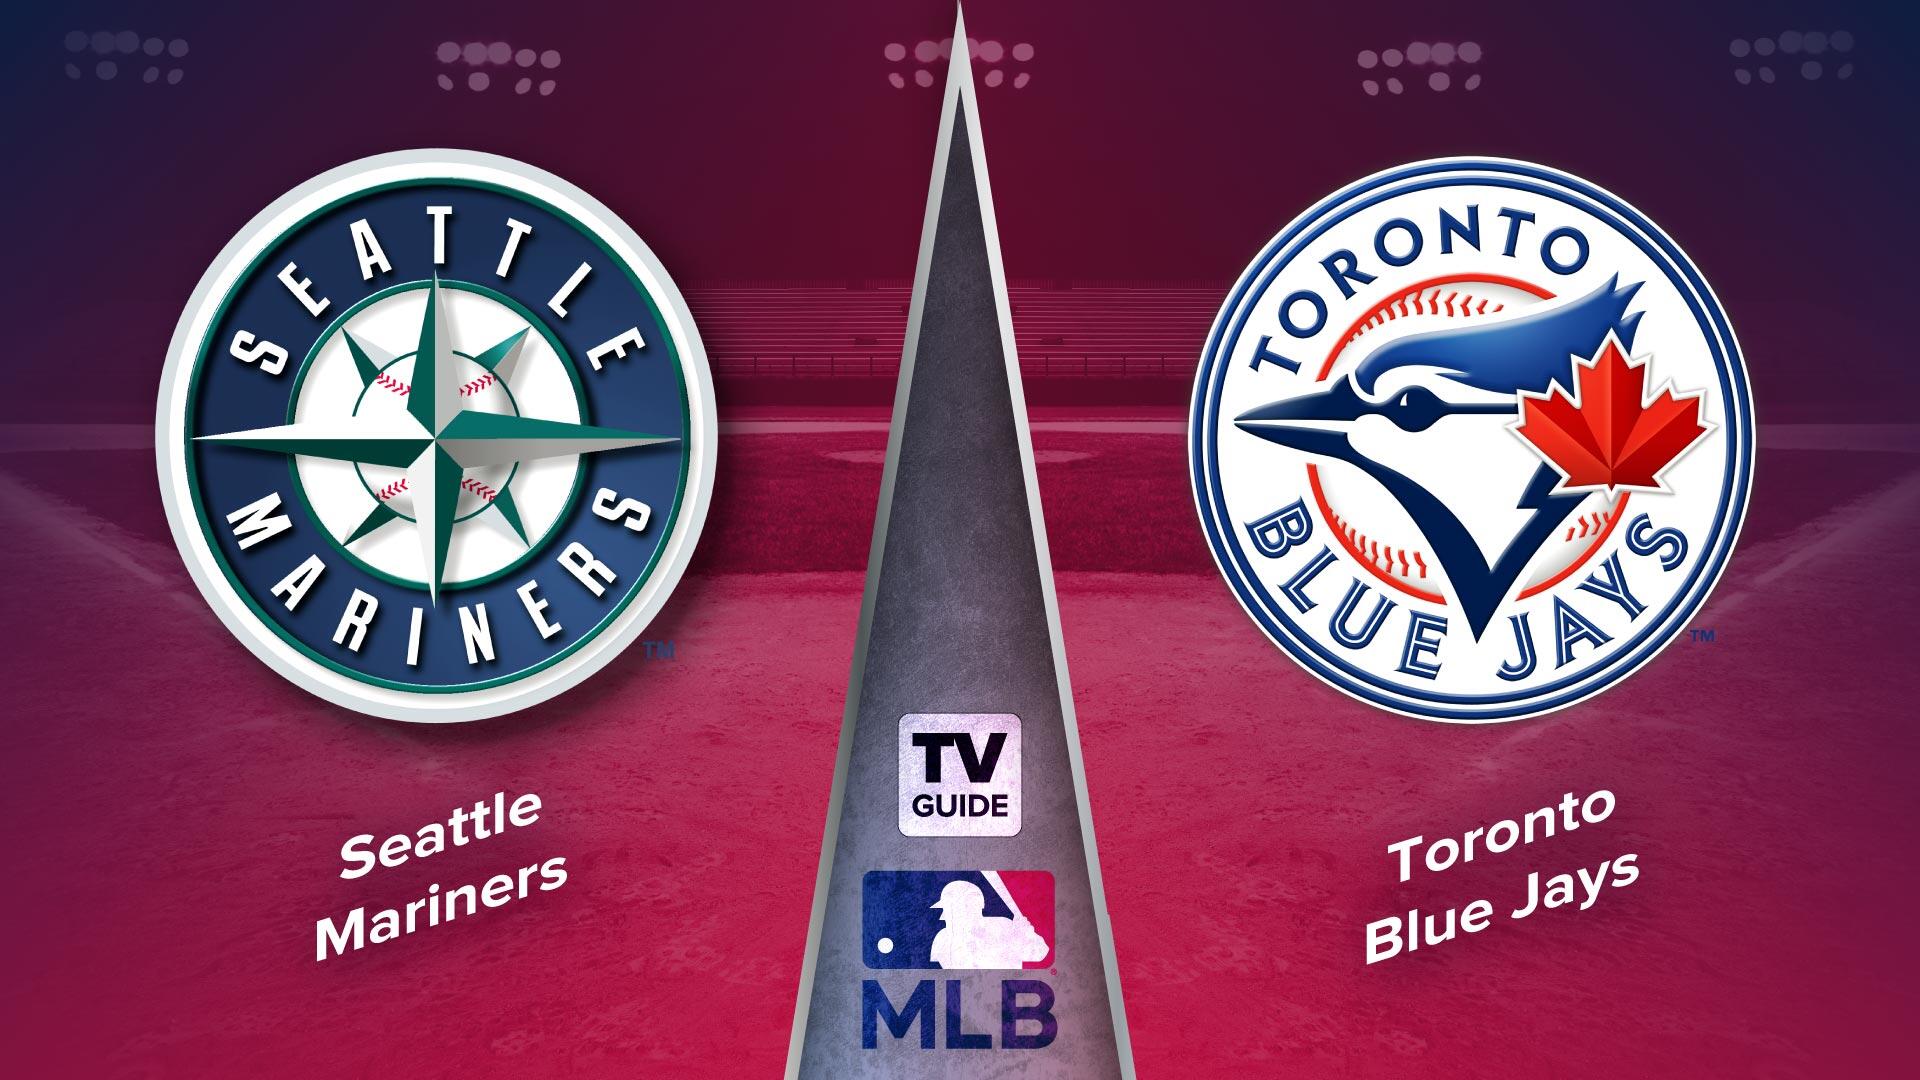 How to Watch Seattle Mariners vs